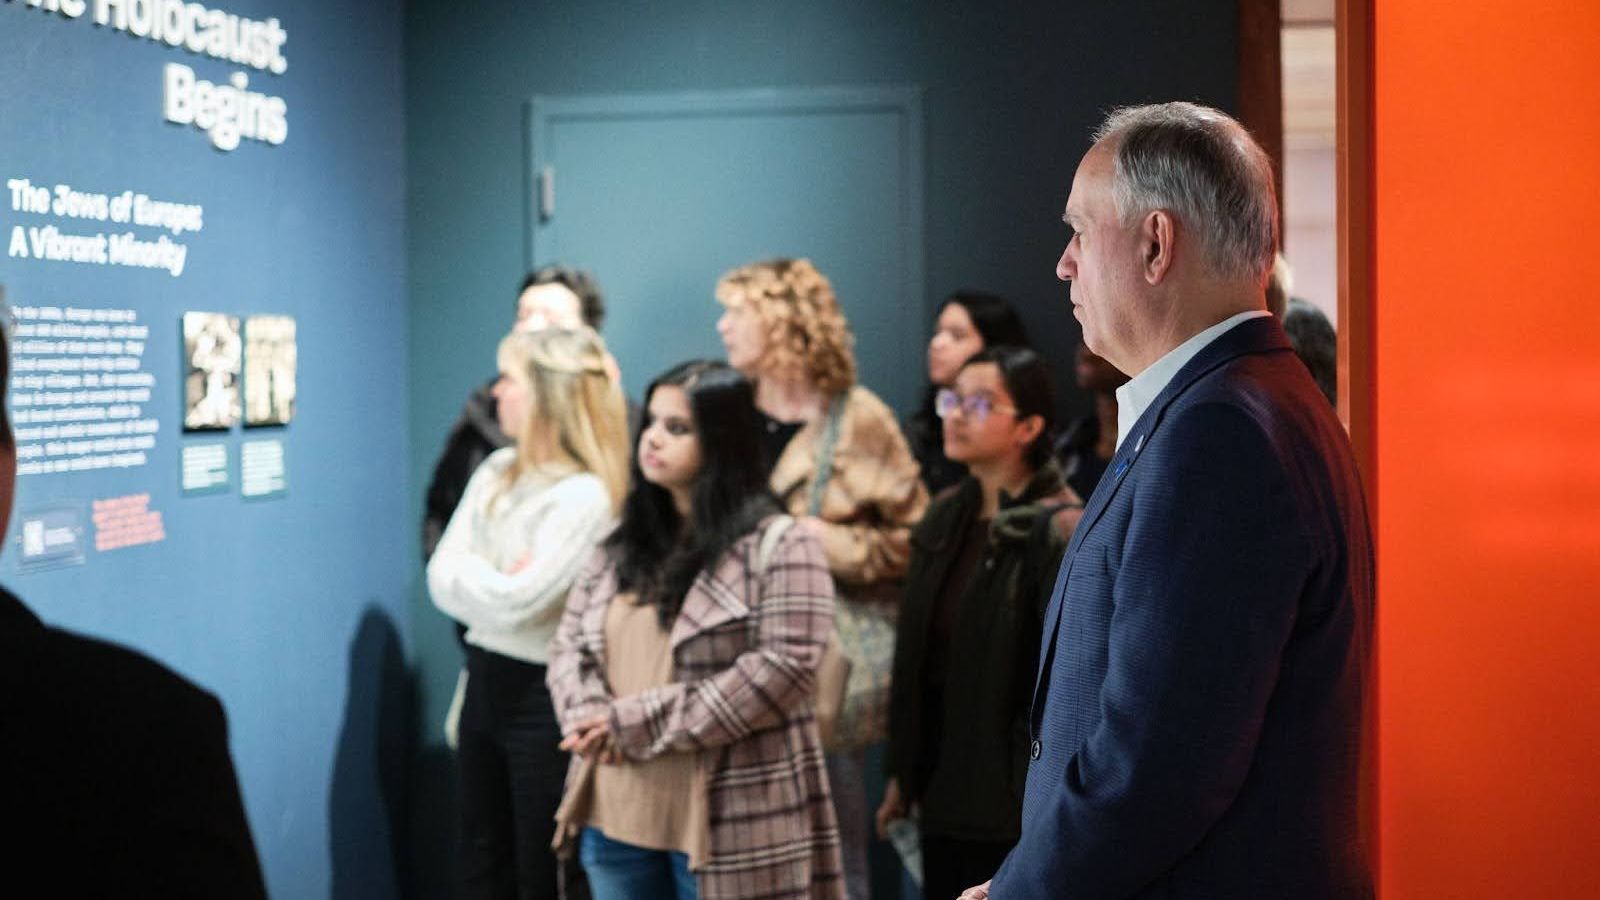 CUNY Chancellor Félix V. Matos Rodríguez, right, and students tour the Museum of Jewish Heritage – A Living Memorial to the Holocaust.